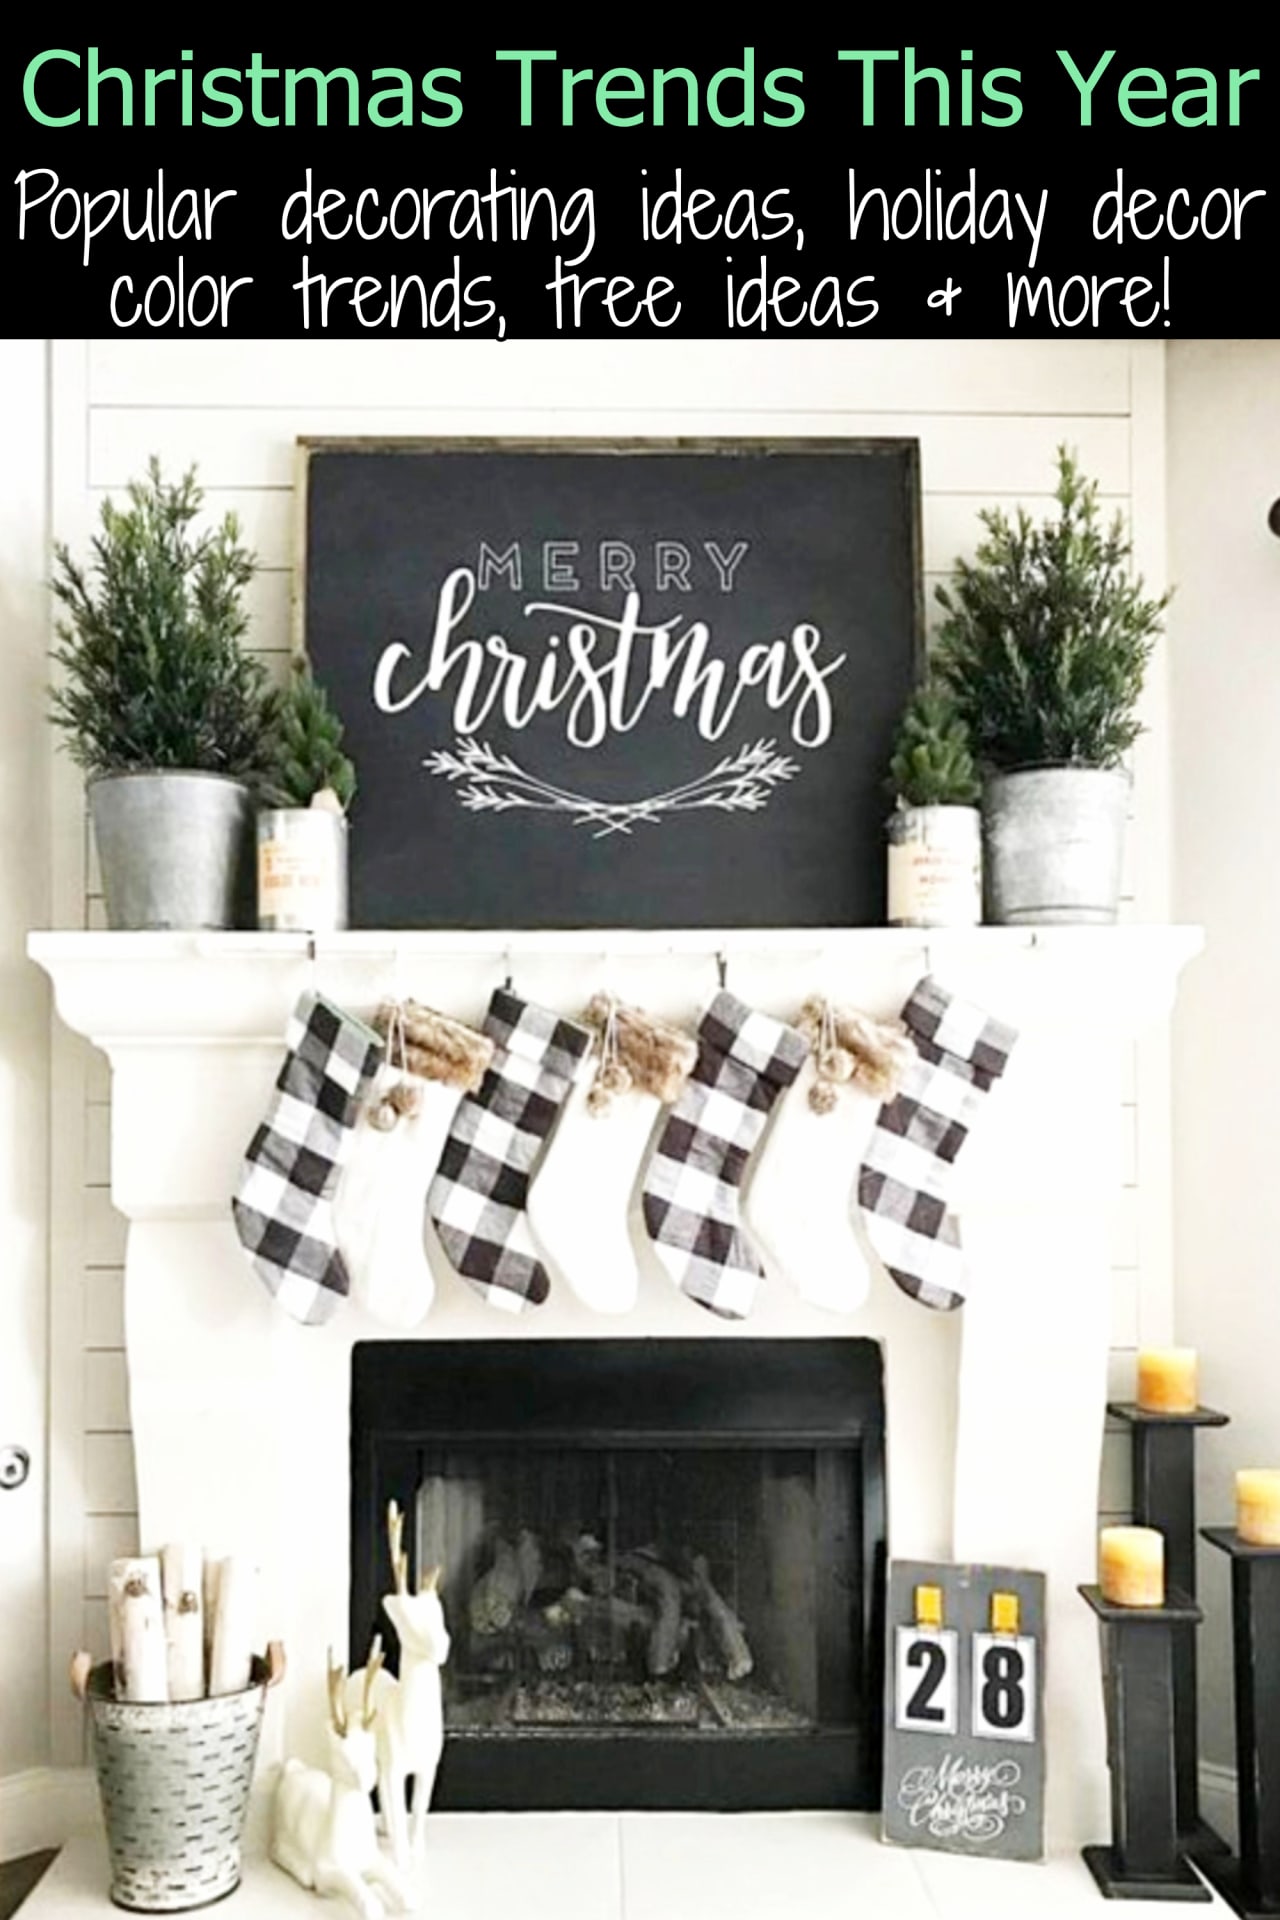 Christmas Trends for 2022 Holiday Season - Popular Christmas color schemes, Christmas home decor, decorating ideas inspiration and more Christmas trends for this year